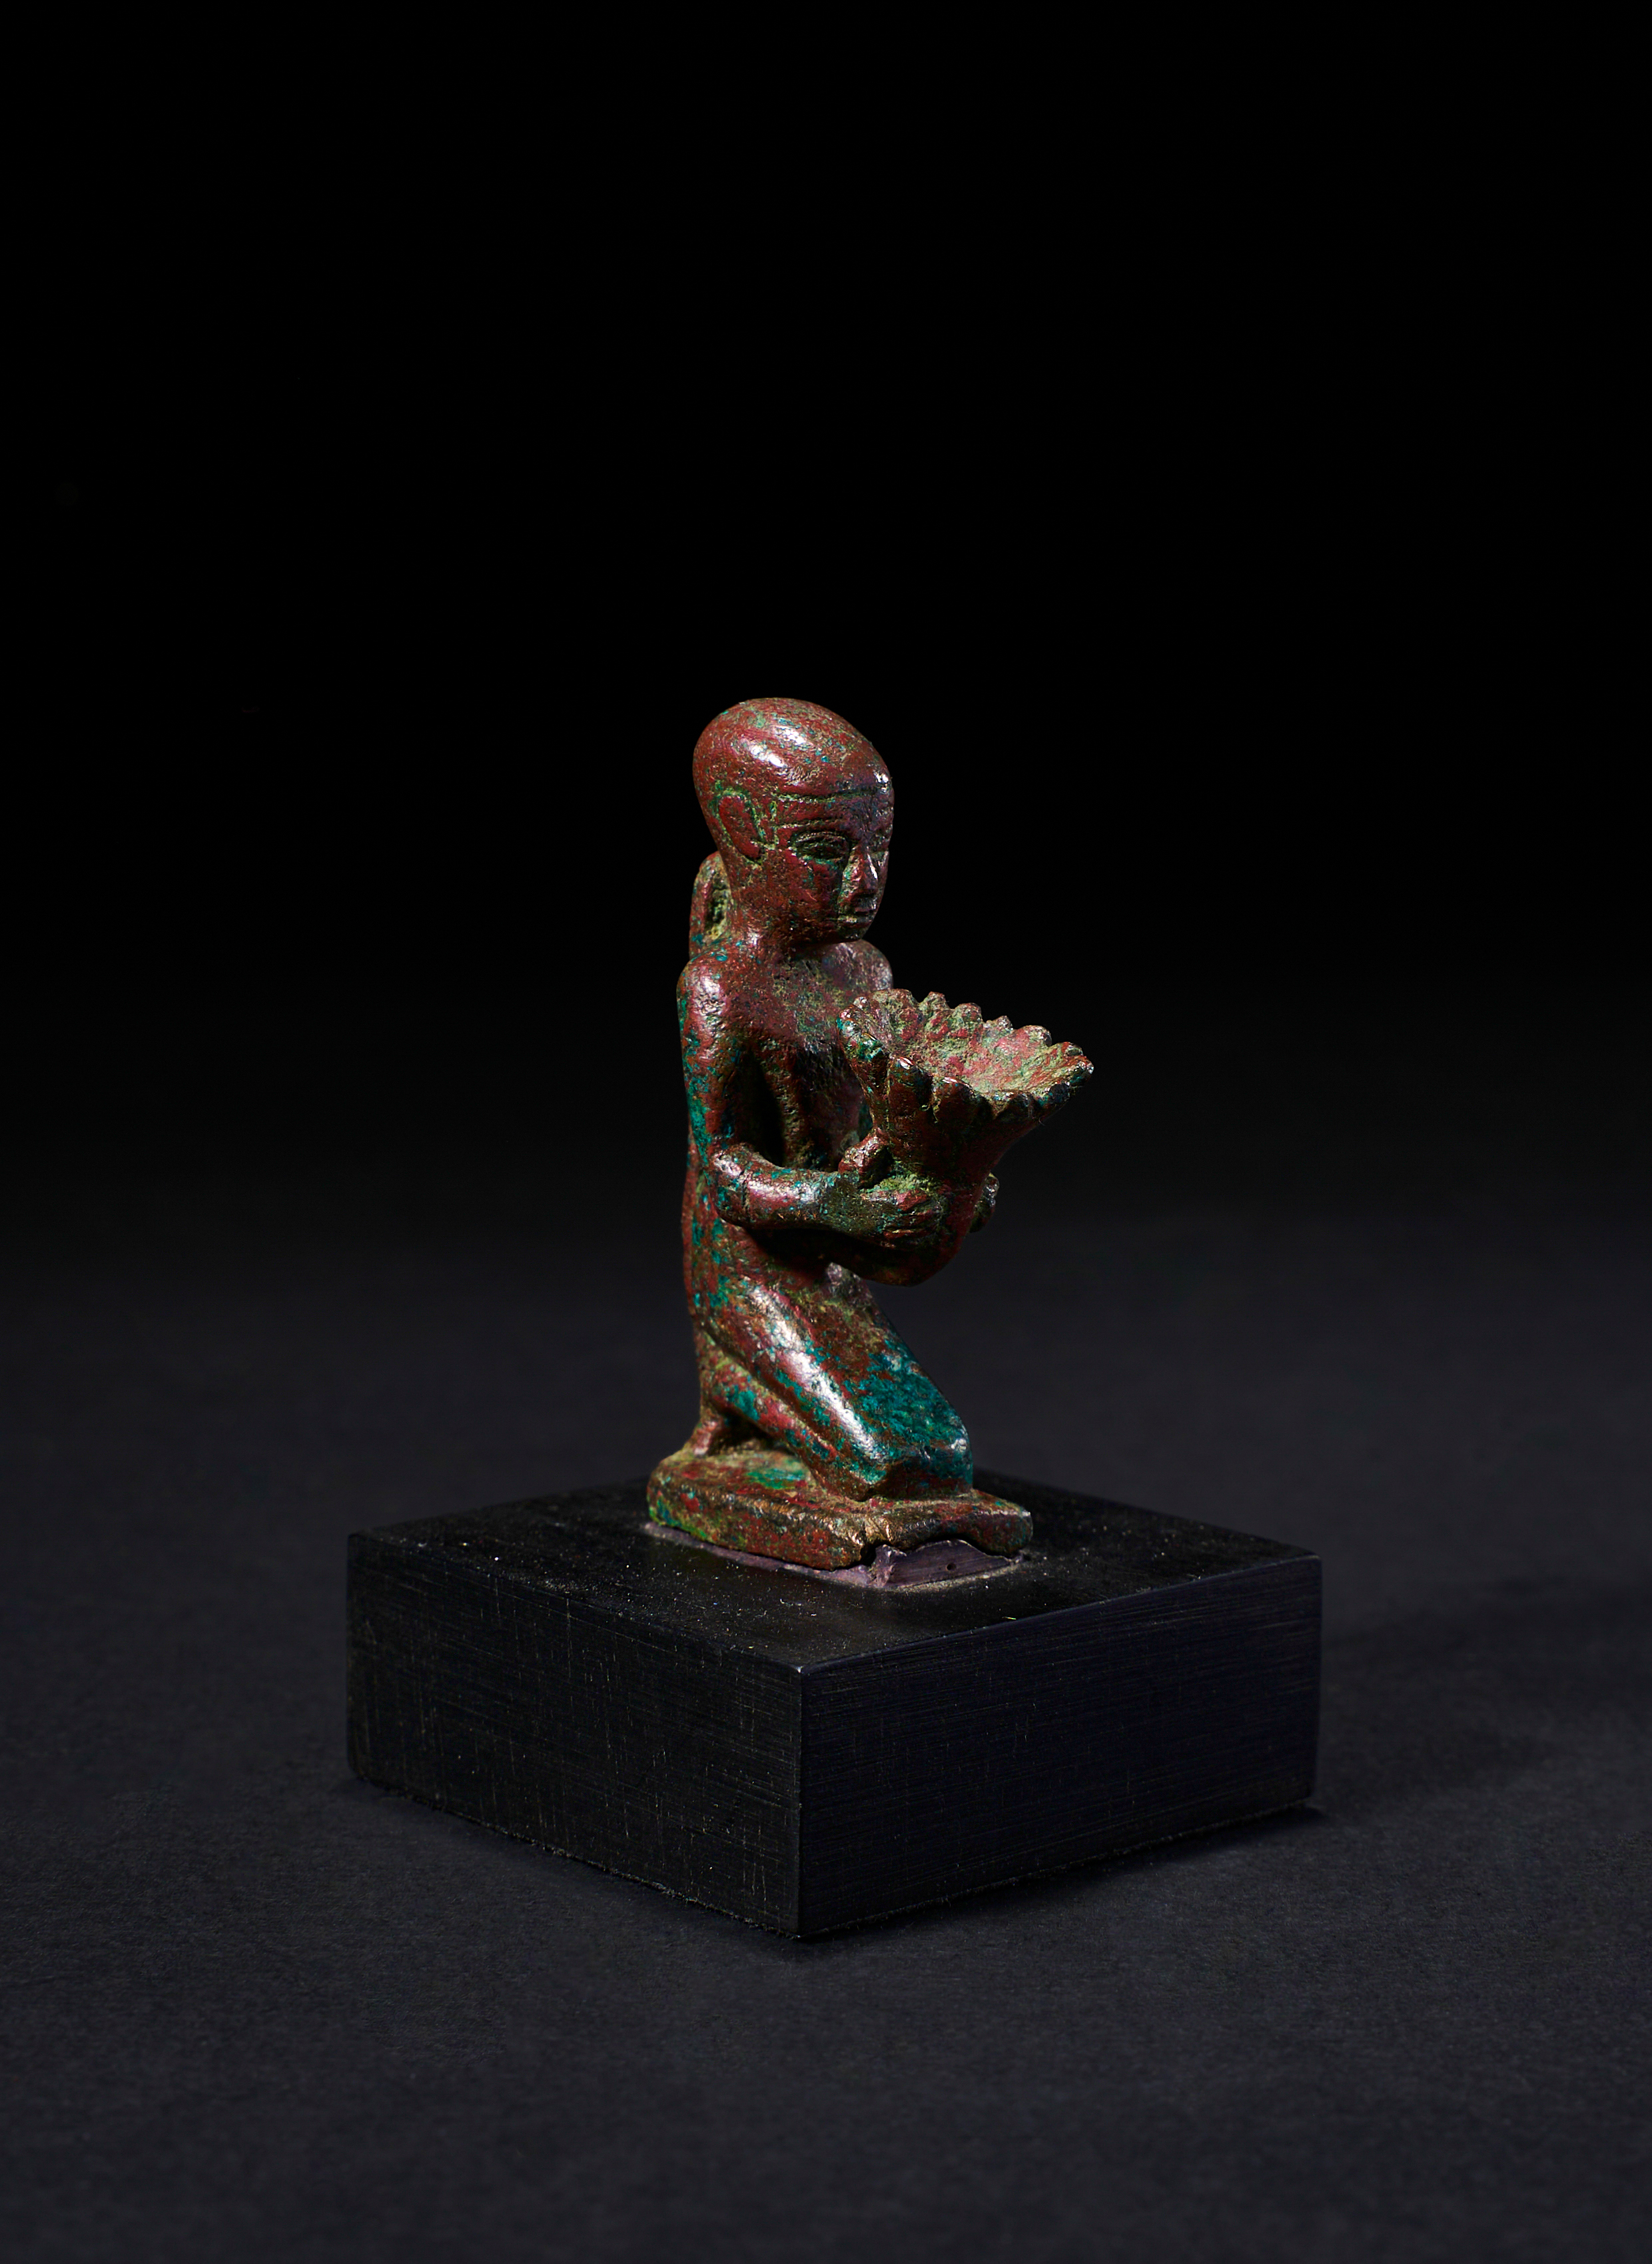 AN EGYPTIAN BRONZE FIGURE OF A PHARAOH DELIVERING A GIFT, PTOLEMAIC PERIOD, 304-30 B.C. - Image 2 of 2